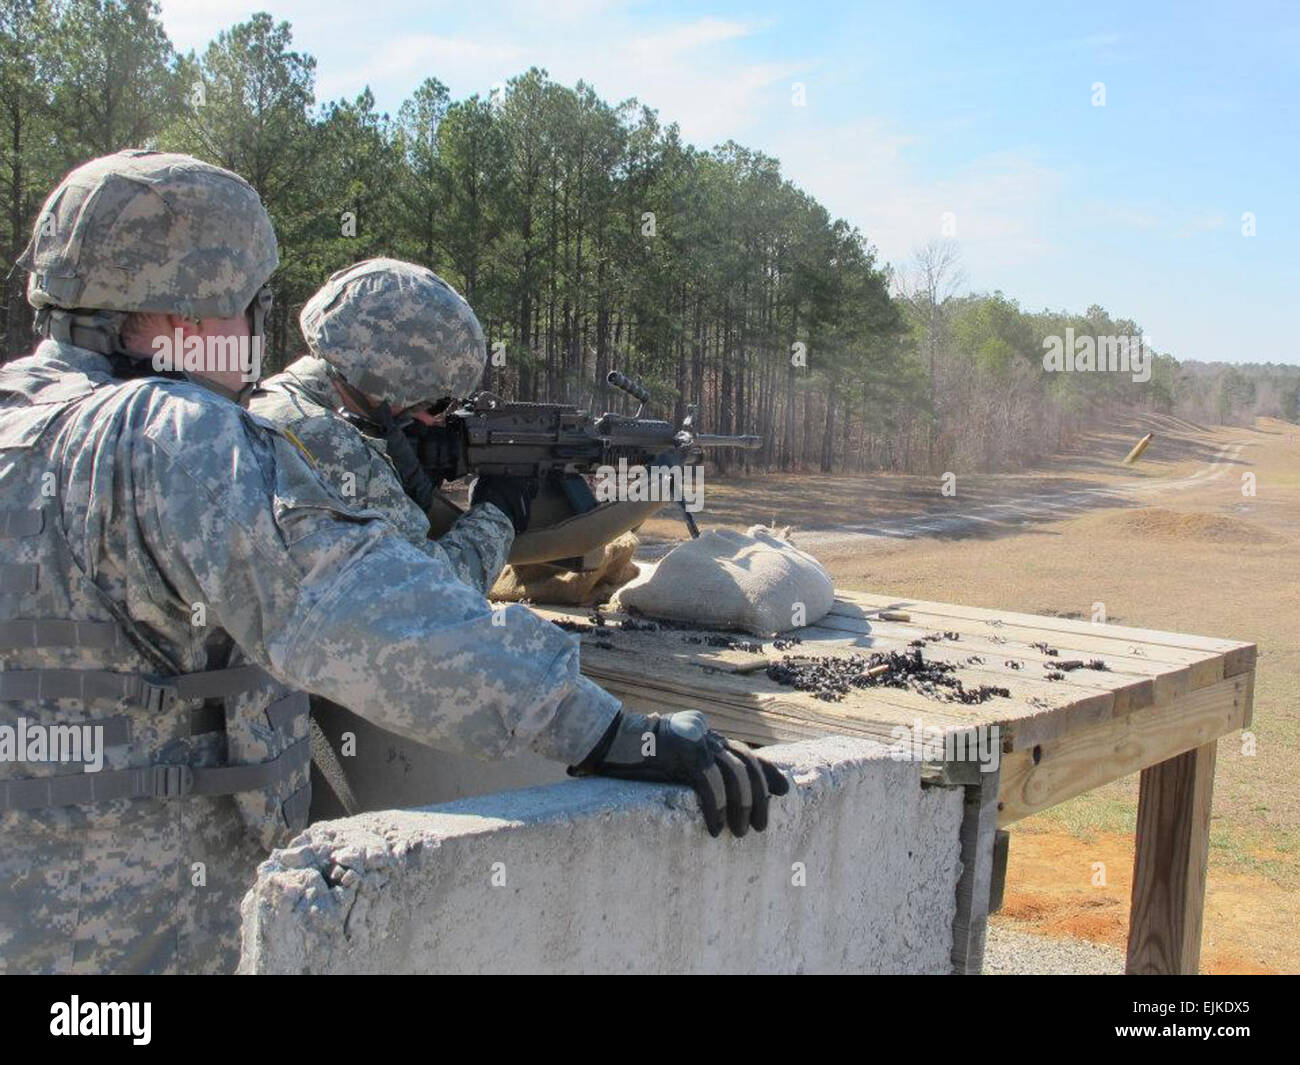 Soldiers of the 11th Transportation Battalion kicked off a week-long gunnery at Fort Pickett, Va. Feb. 6 with training set to end Feb. 10. Honing their marksmanship skills Soldiers spent time qualifying on a variety of weapons to include the M249, M240B, MK19, M2 and M16A2. Stock Photo